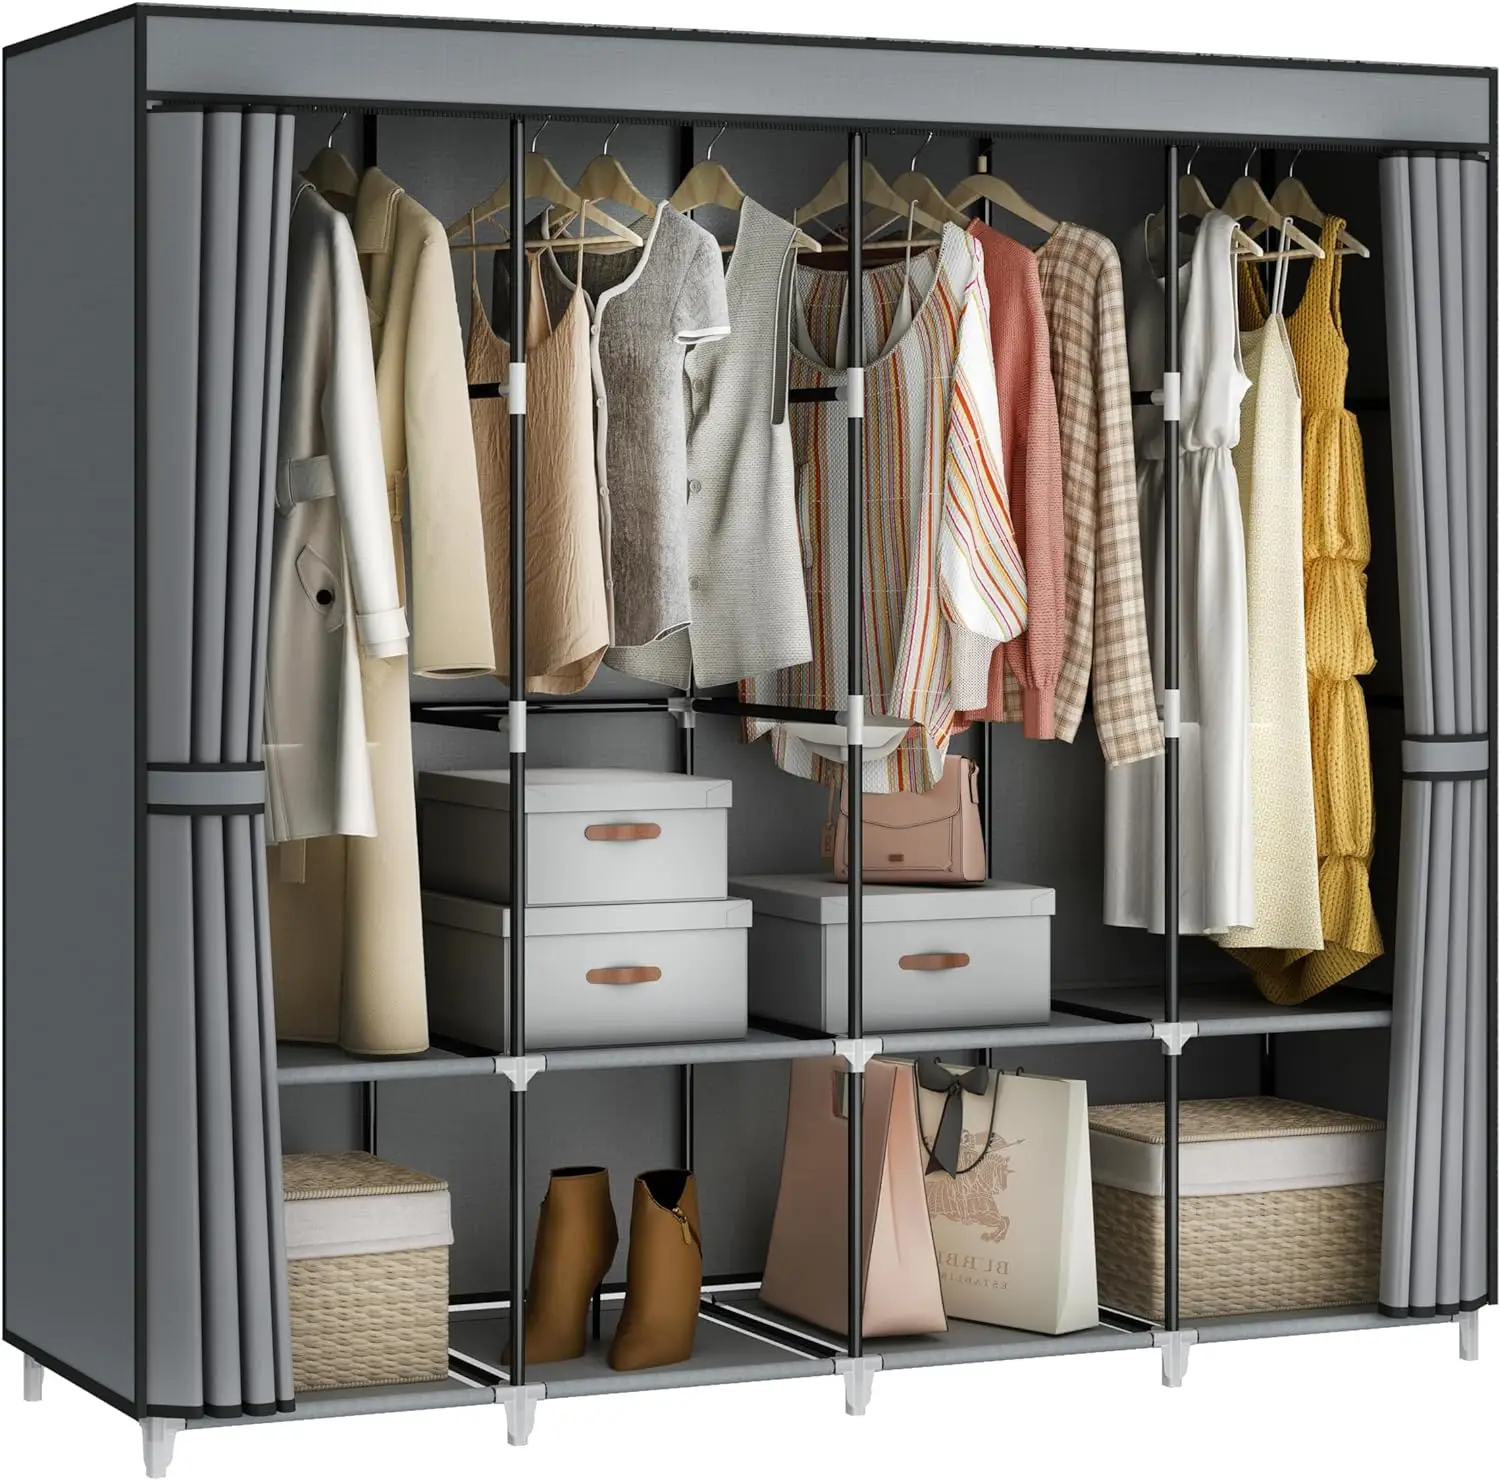 

67 Inch Large Capacity Portable Closet Wardrobe with Non-Woven Fabric Cover, 4 Hanging Rods, 8 Shelves - Grey Clothes Storage Or